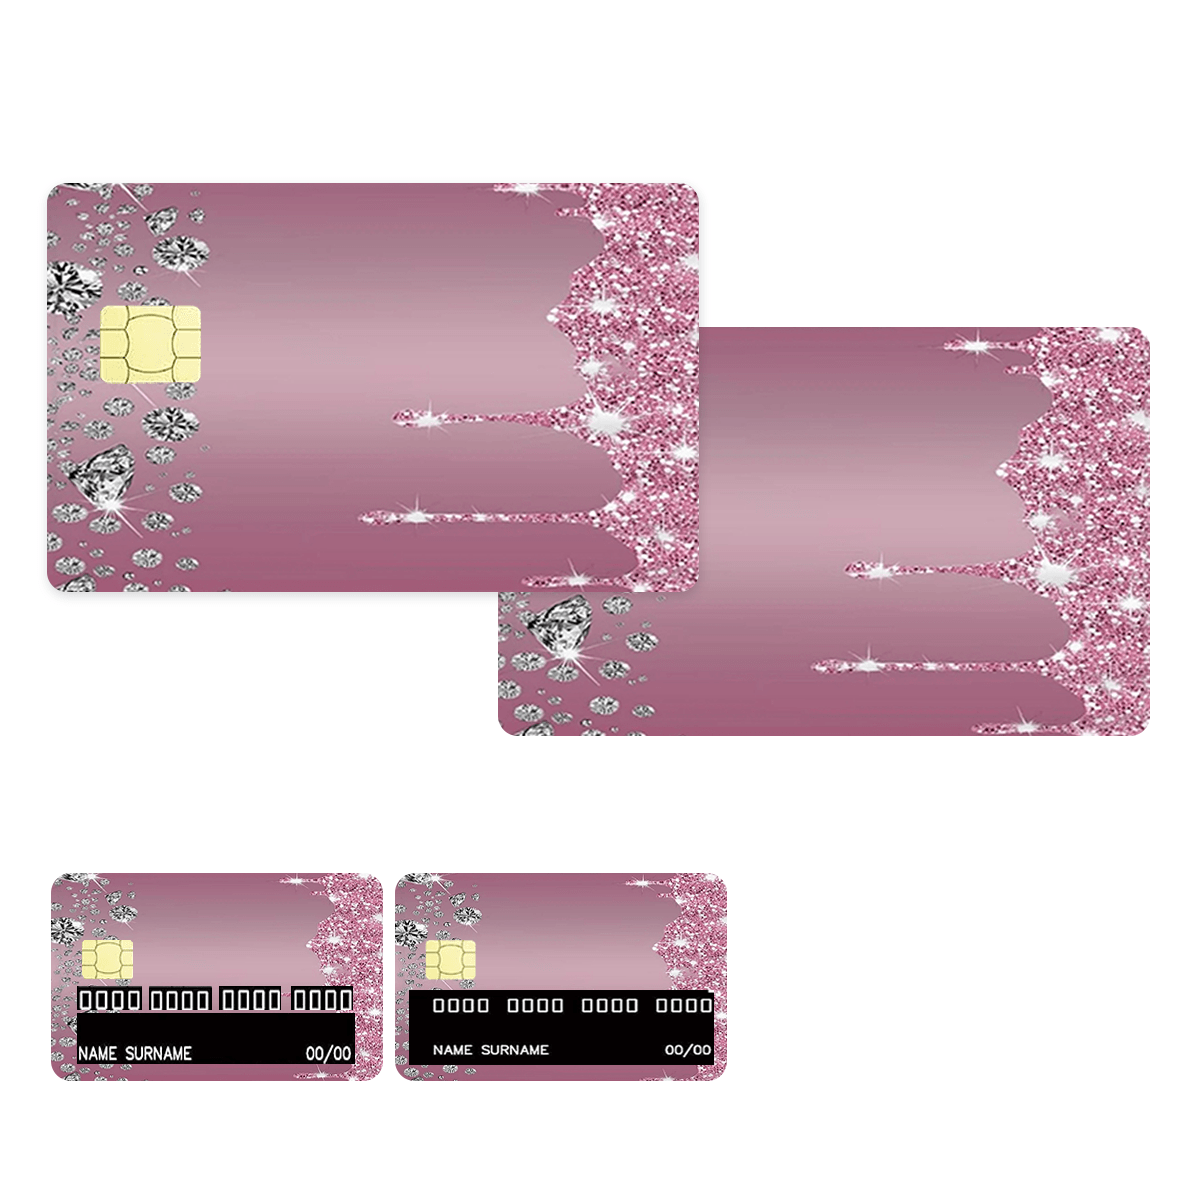 

4pcs In 1 Pink Dripping Glittercard Skin Sticker For Ebt, Transportation, Key, Credit, Debit Card Skin - Protecting And Personalizing Bank Card - No Bubble, Slim, Waterproof, Digital-printed